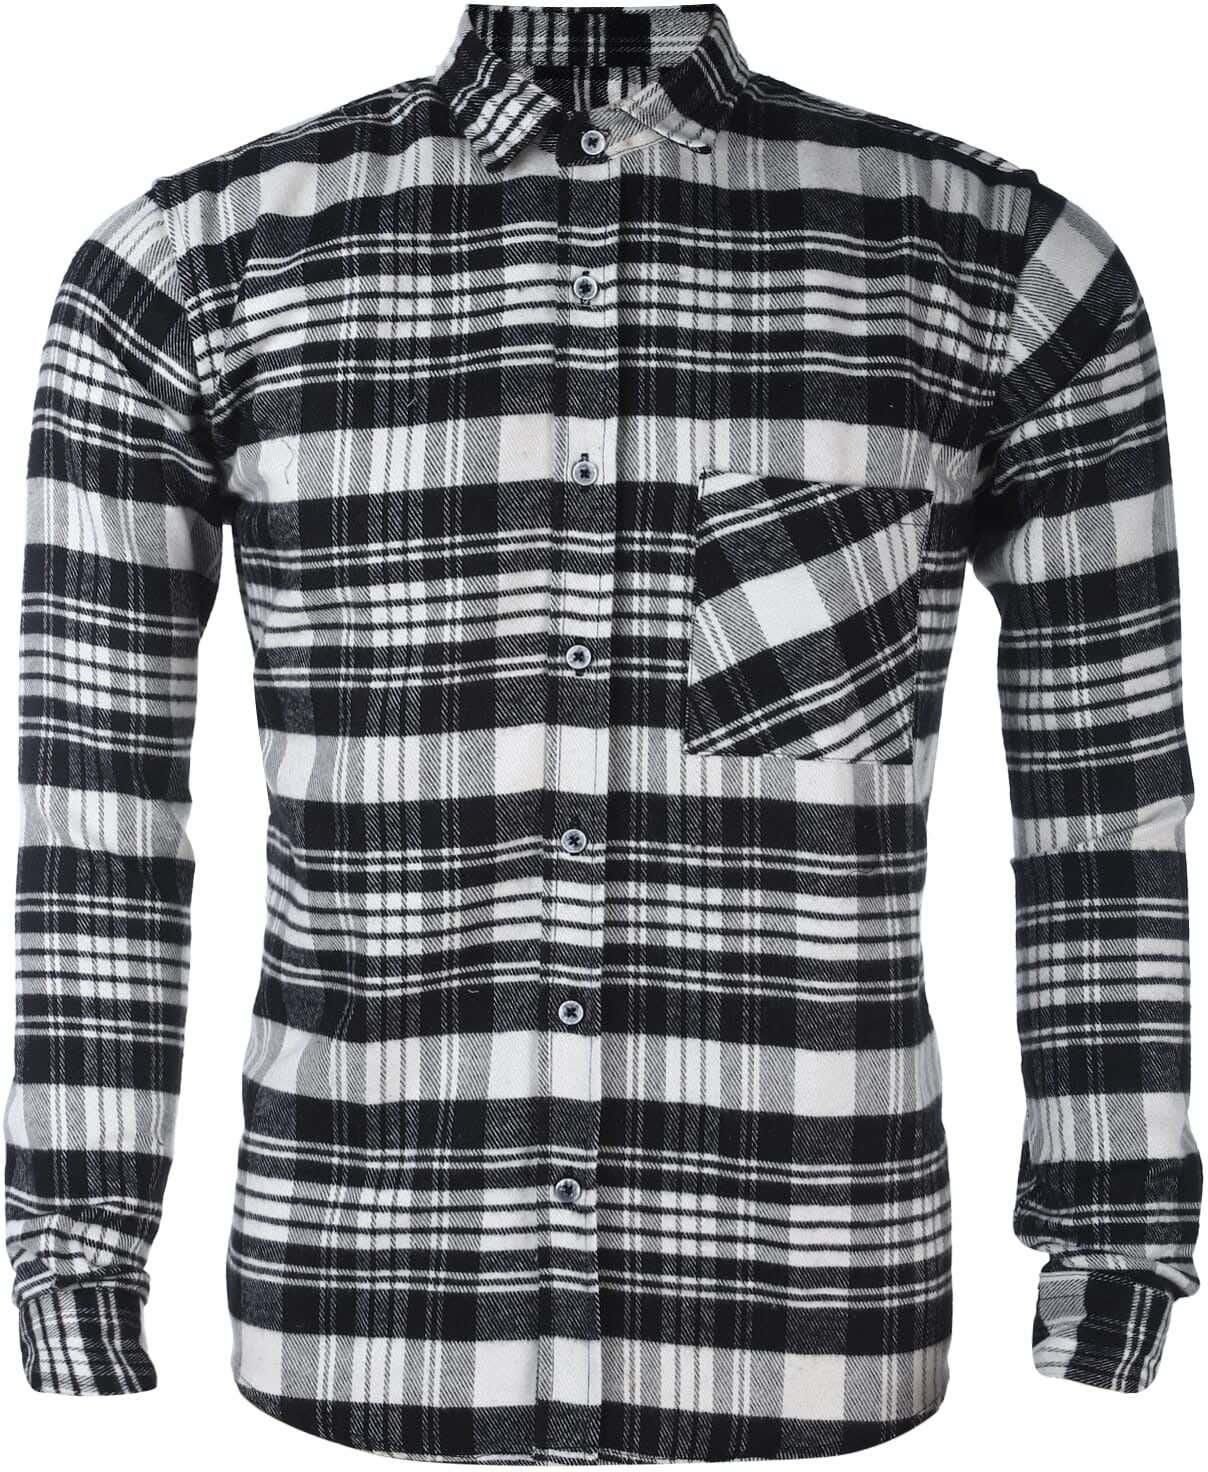 Get Confirm Wool Long Sleeve Shirt For Men, Size 44 - White Black with best offers | Raneen.com